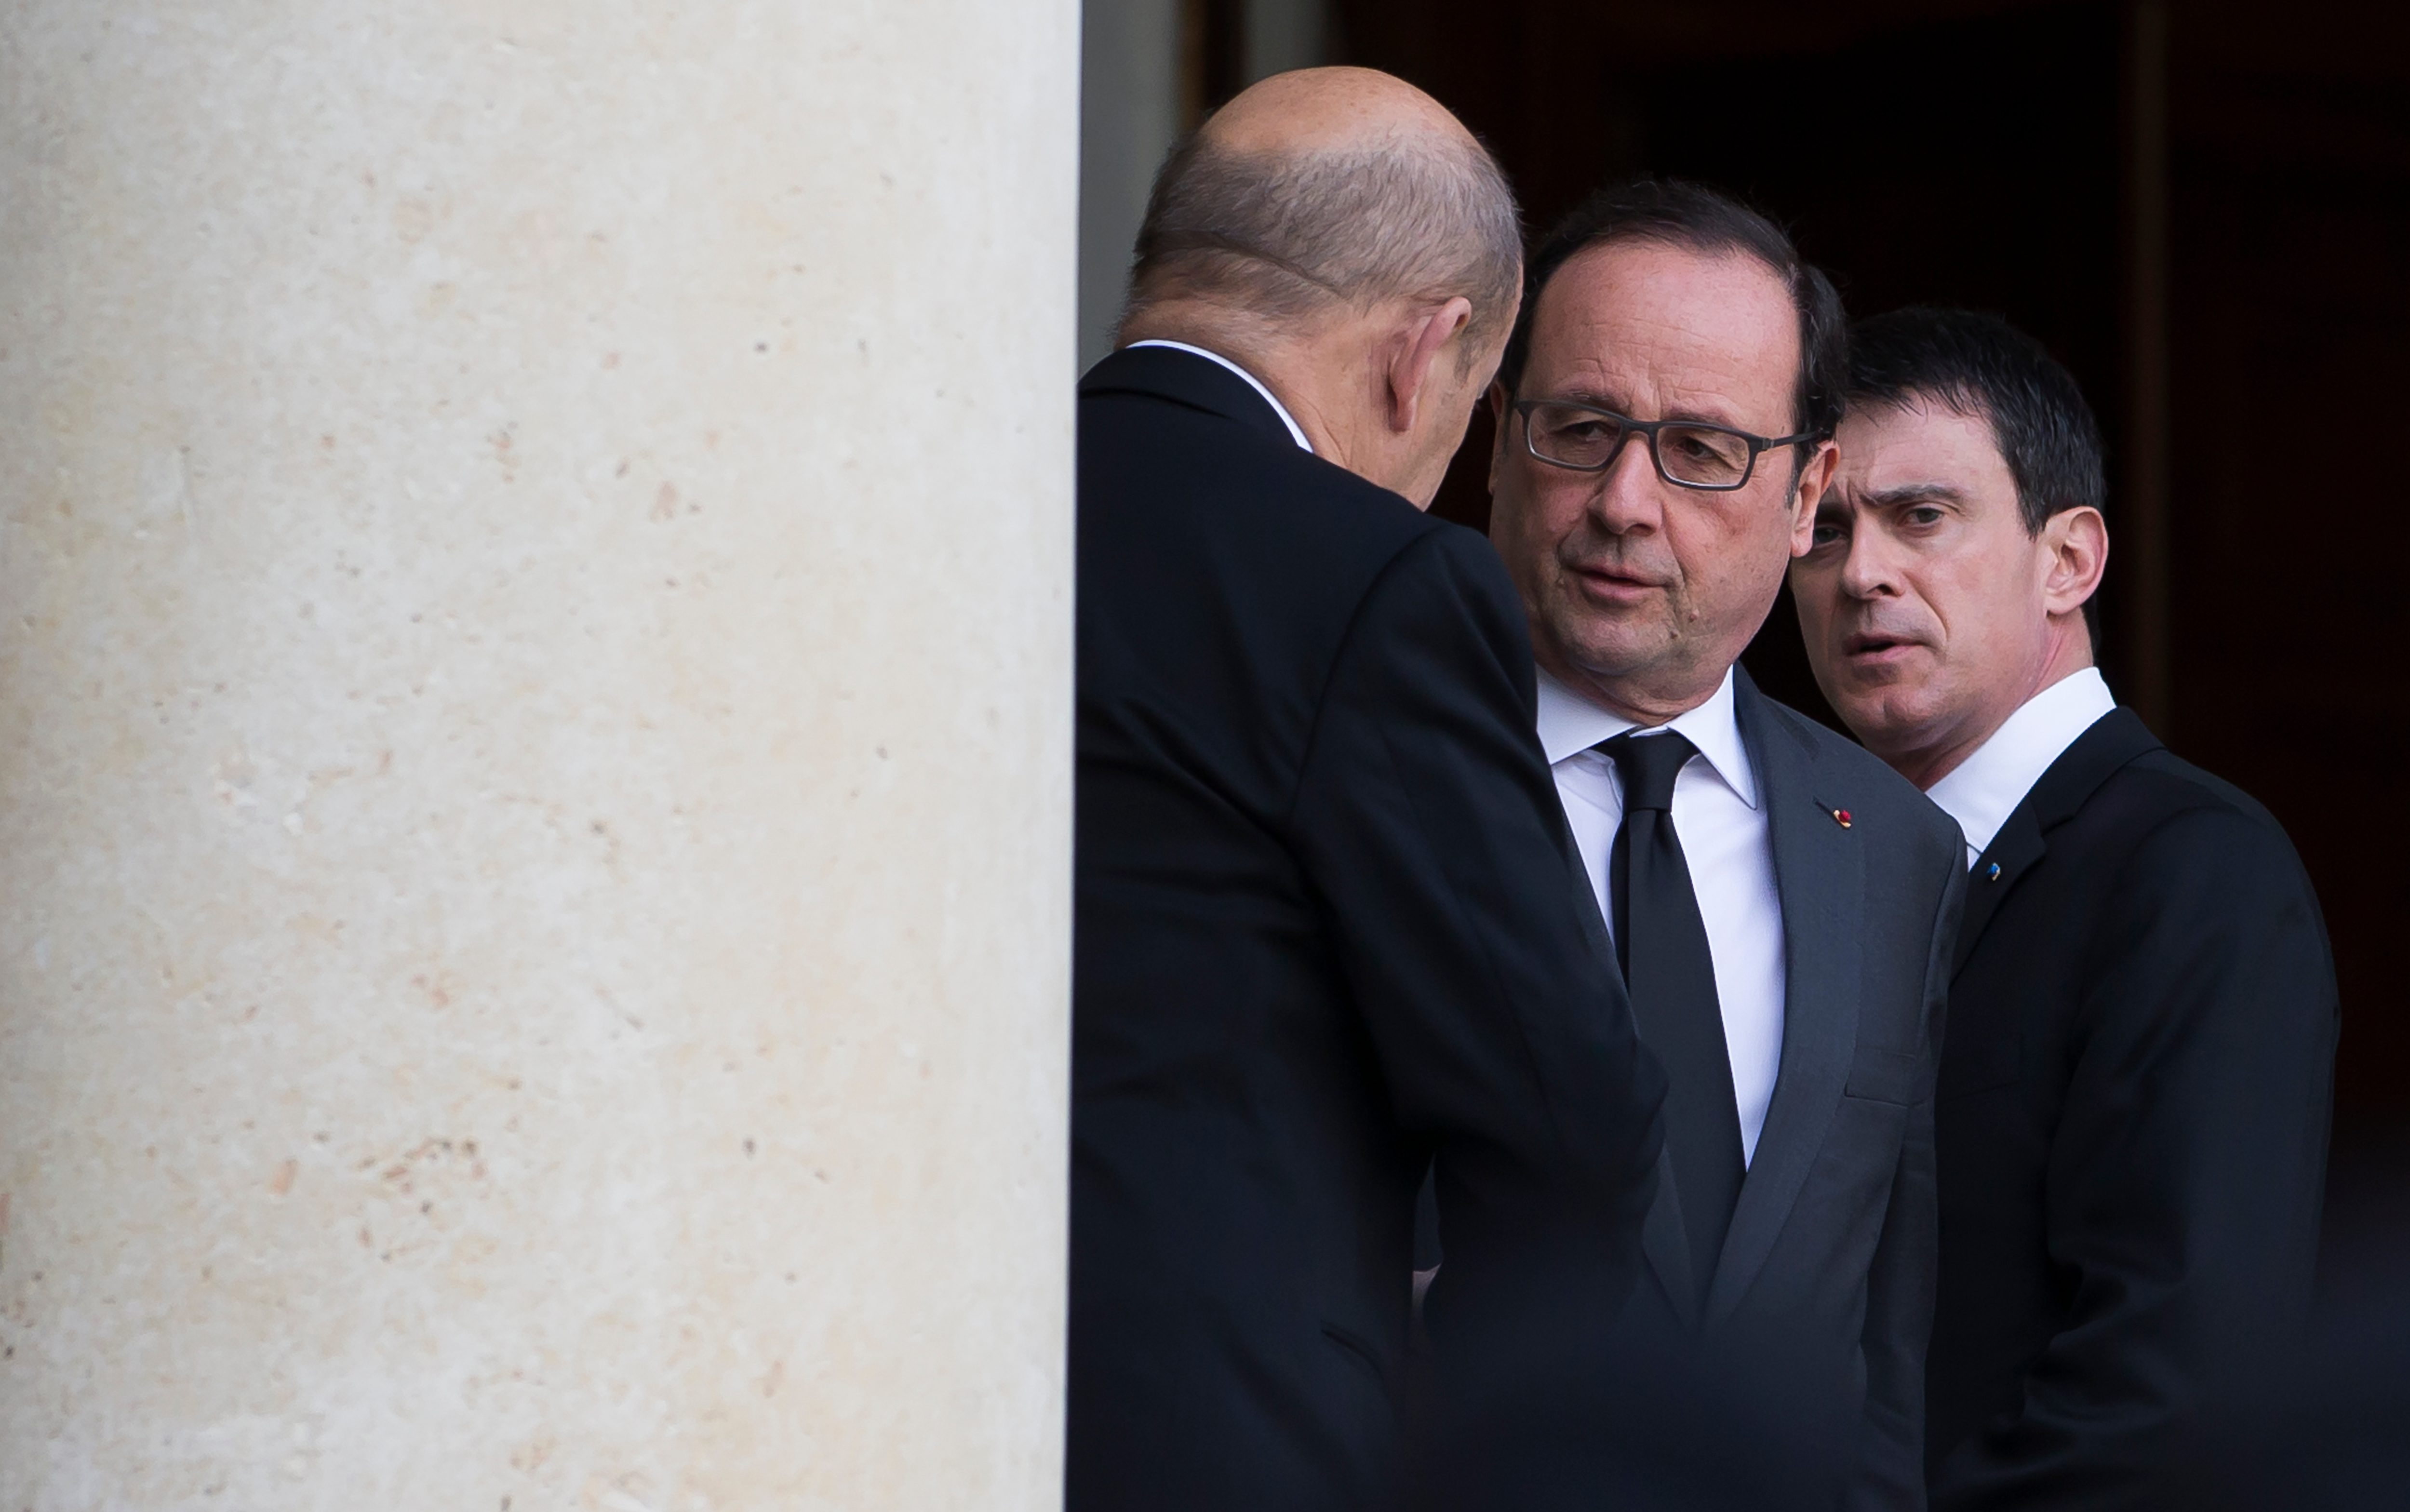 CRISIS MEETING. French President Francois Hollande (C) speaks with Prime Minister Manuel Valls (R) and Minister of Defense Jean-Yves Le Drian (L) after they hold a crisis defense meeting at the Elysee Palace in Paris, France, March 22, 2016. Photo by Ian Langsdon/EPA   